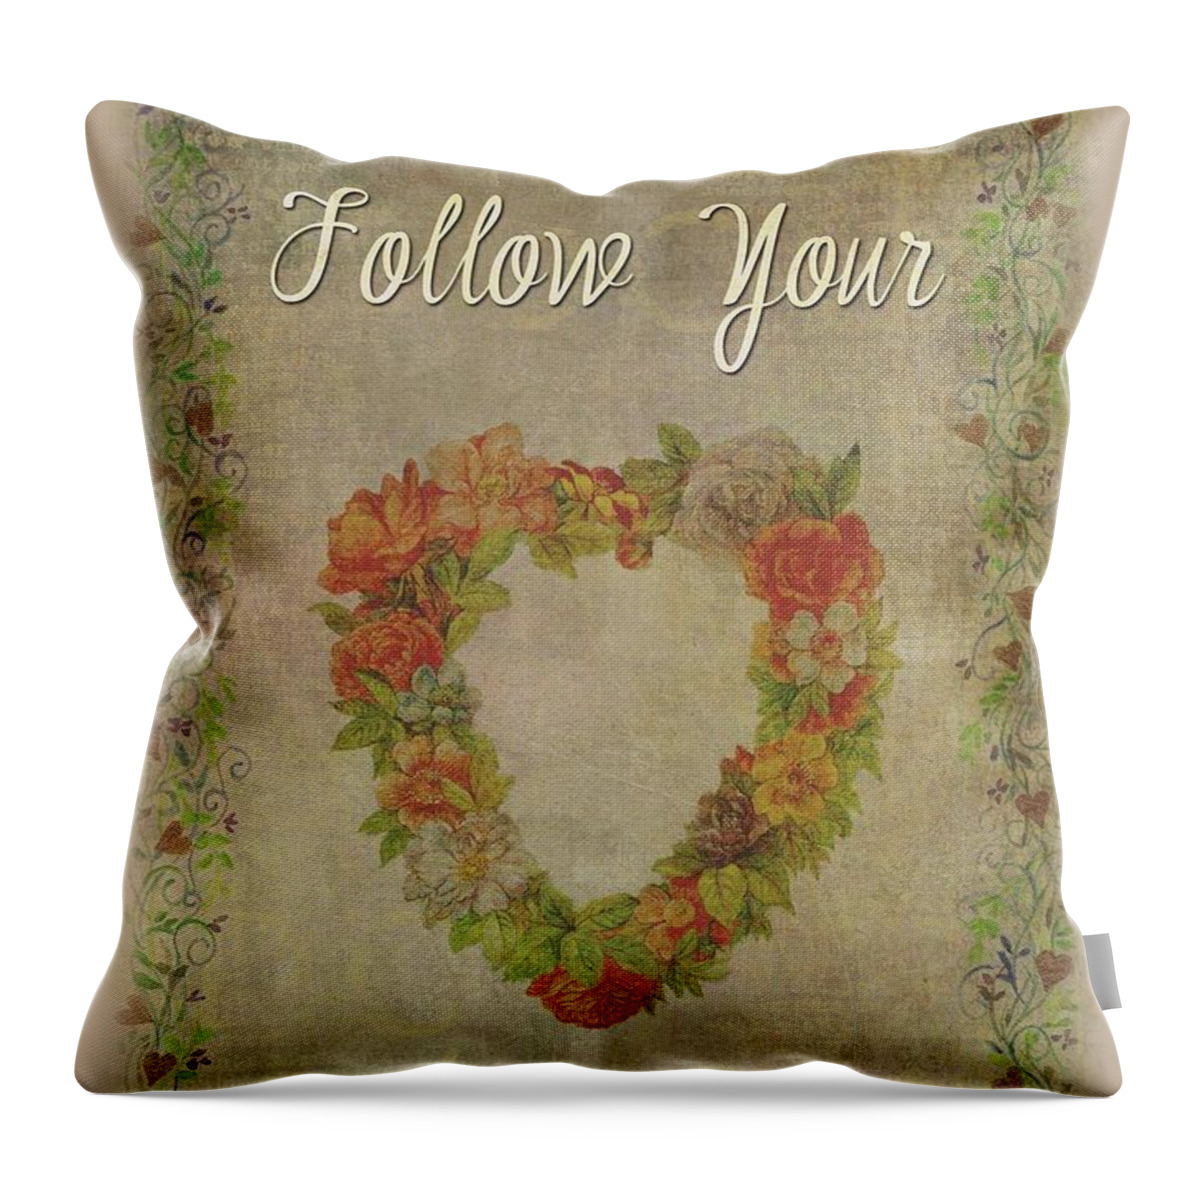 Motivational Quote Throw Pillow featuring the painting Follow Your Heart Motivational by Judith Cheng